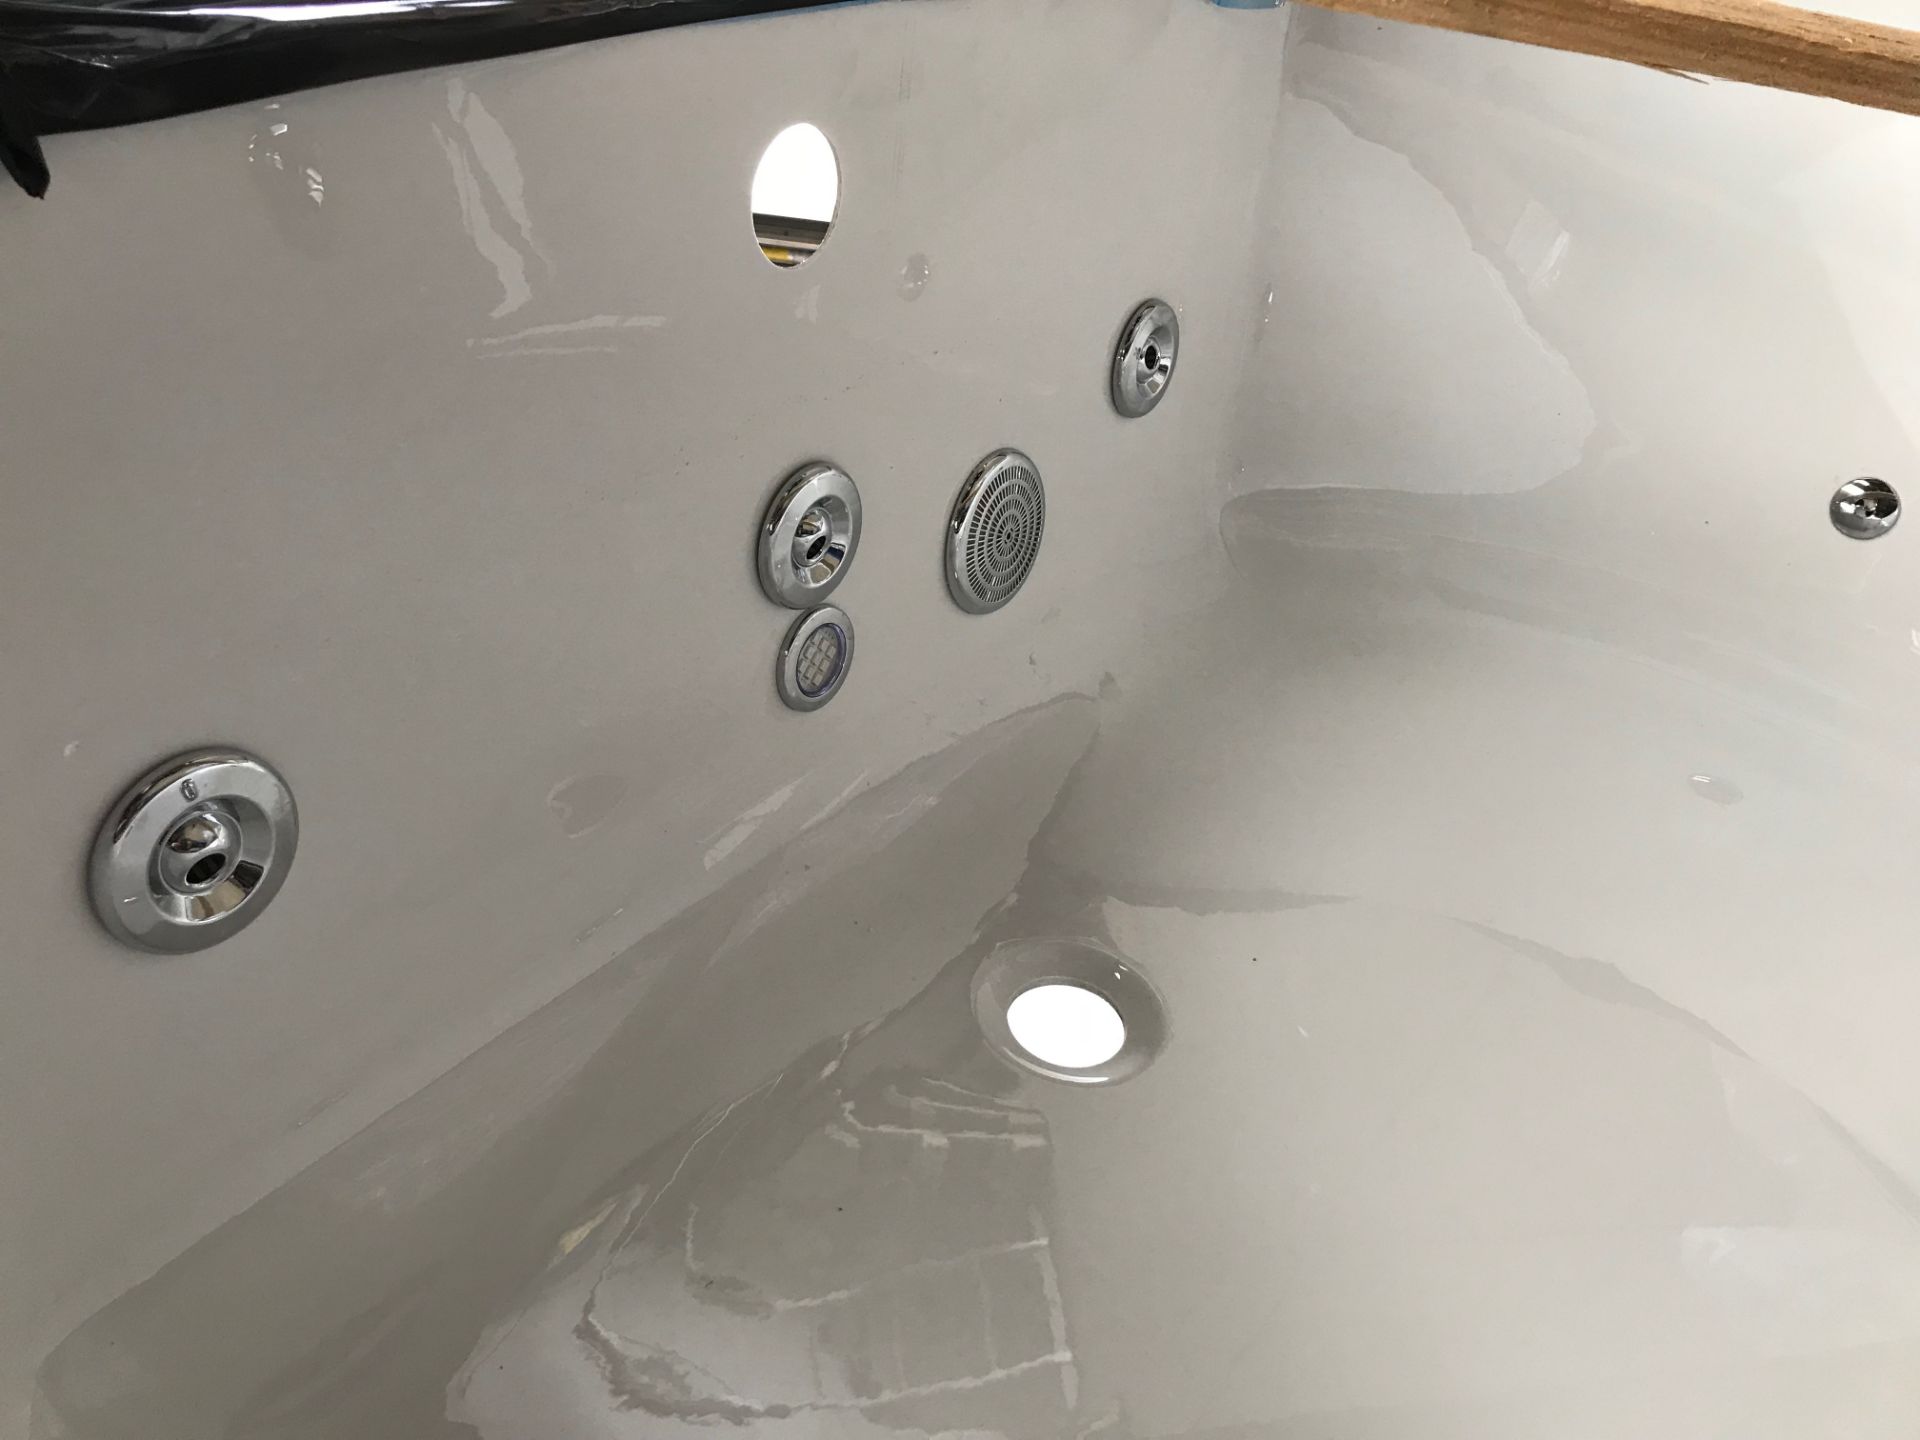 Whirlpool Corner Bath Includes Headrests, Pump and fitments, feet and fittings. - Image 7 of 9